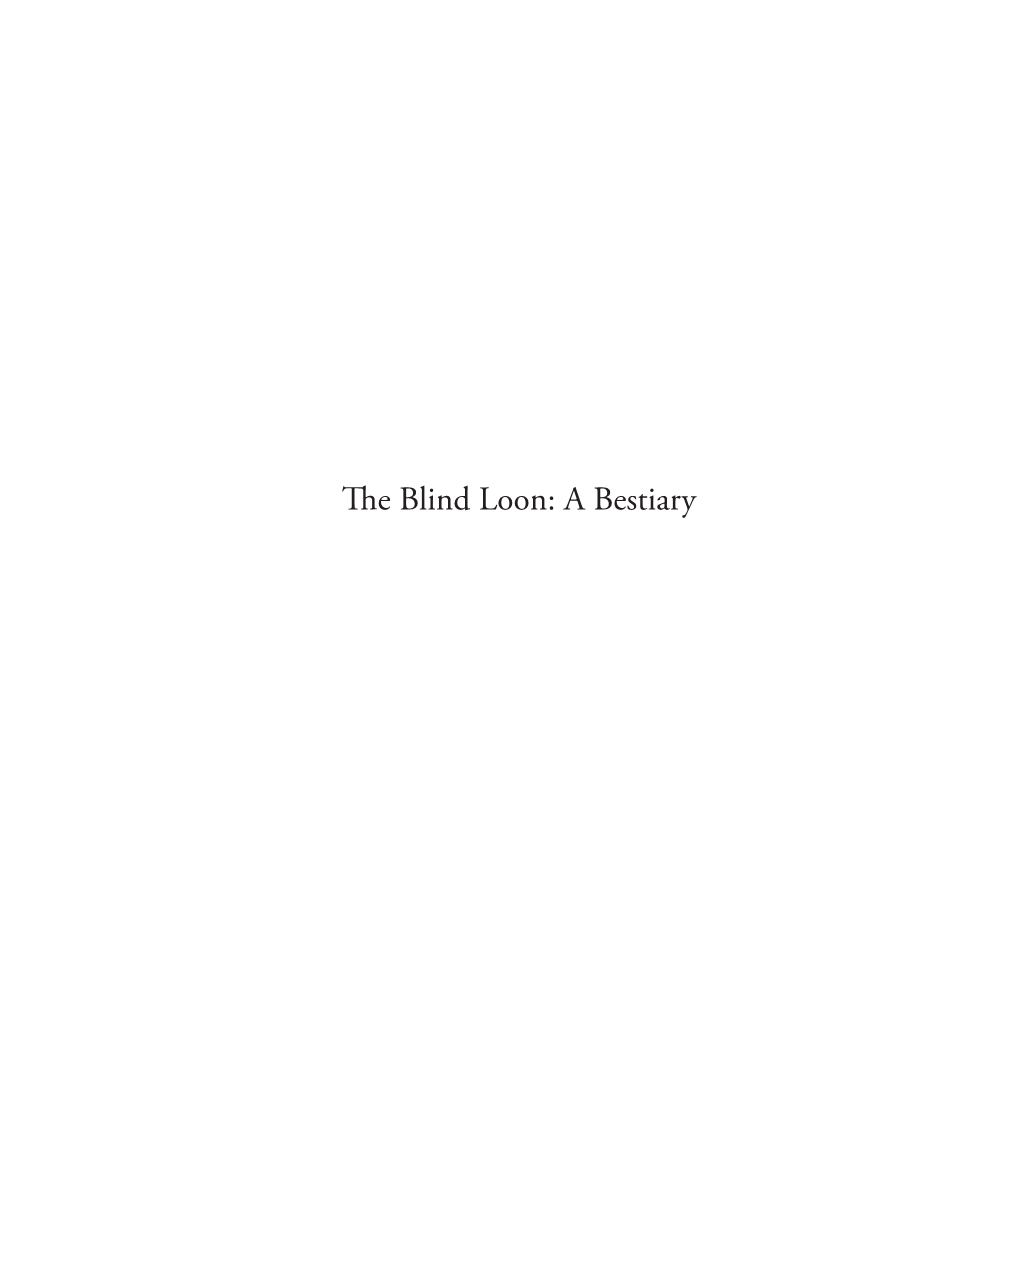 The Blind Loon: a Bestiary